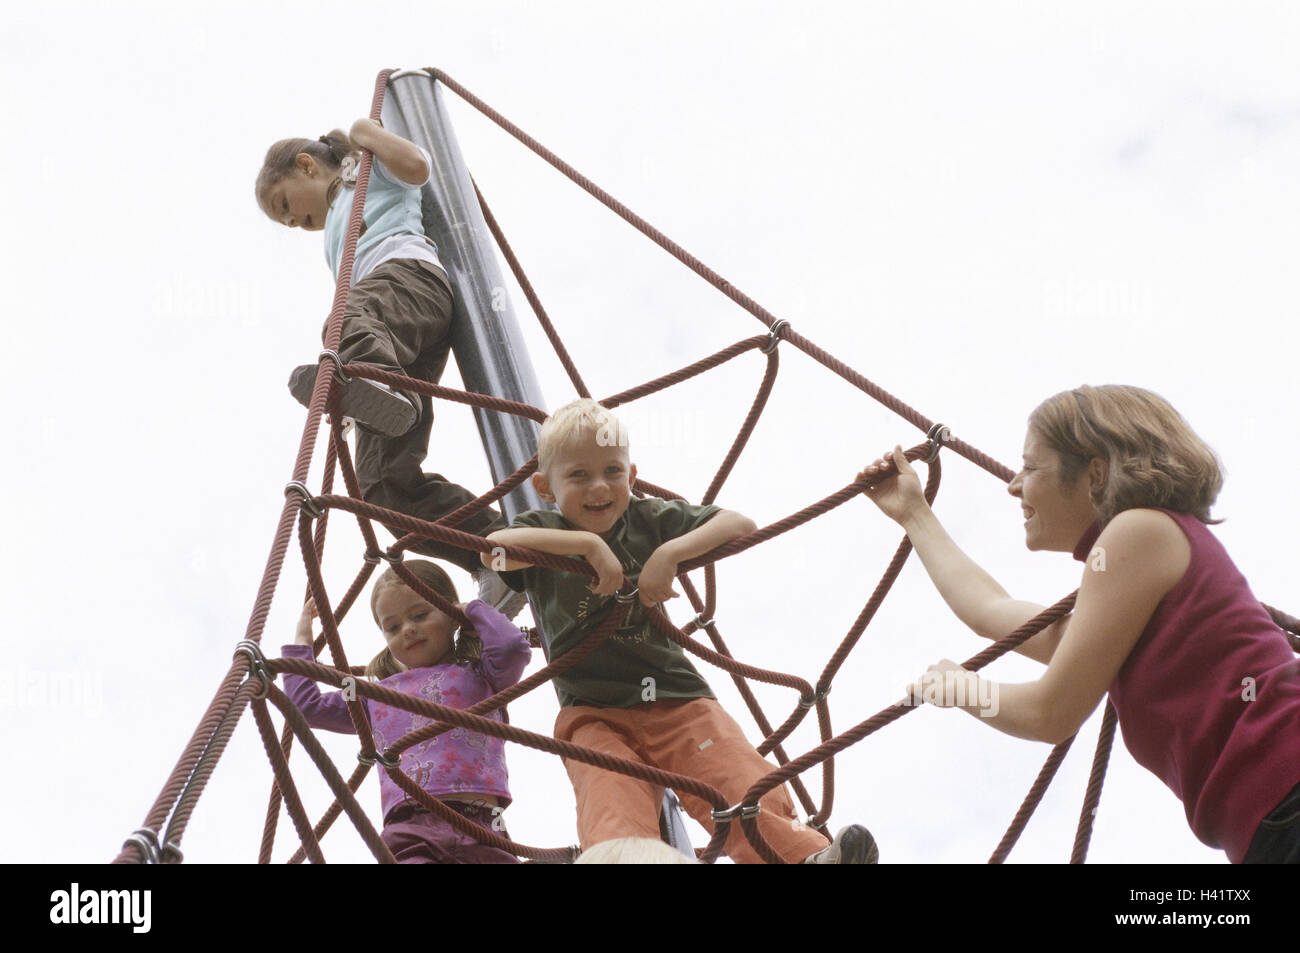 Playground, climbing frame, children, play, nut, control, leisure time, childhood, fun, adventure playground, leather, mast, ropes, skill, courage, have of a good head for heights, courageously, cheerfulness, girl, boy, friends, siblings, three, 3 - 6 yea Stock Photo